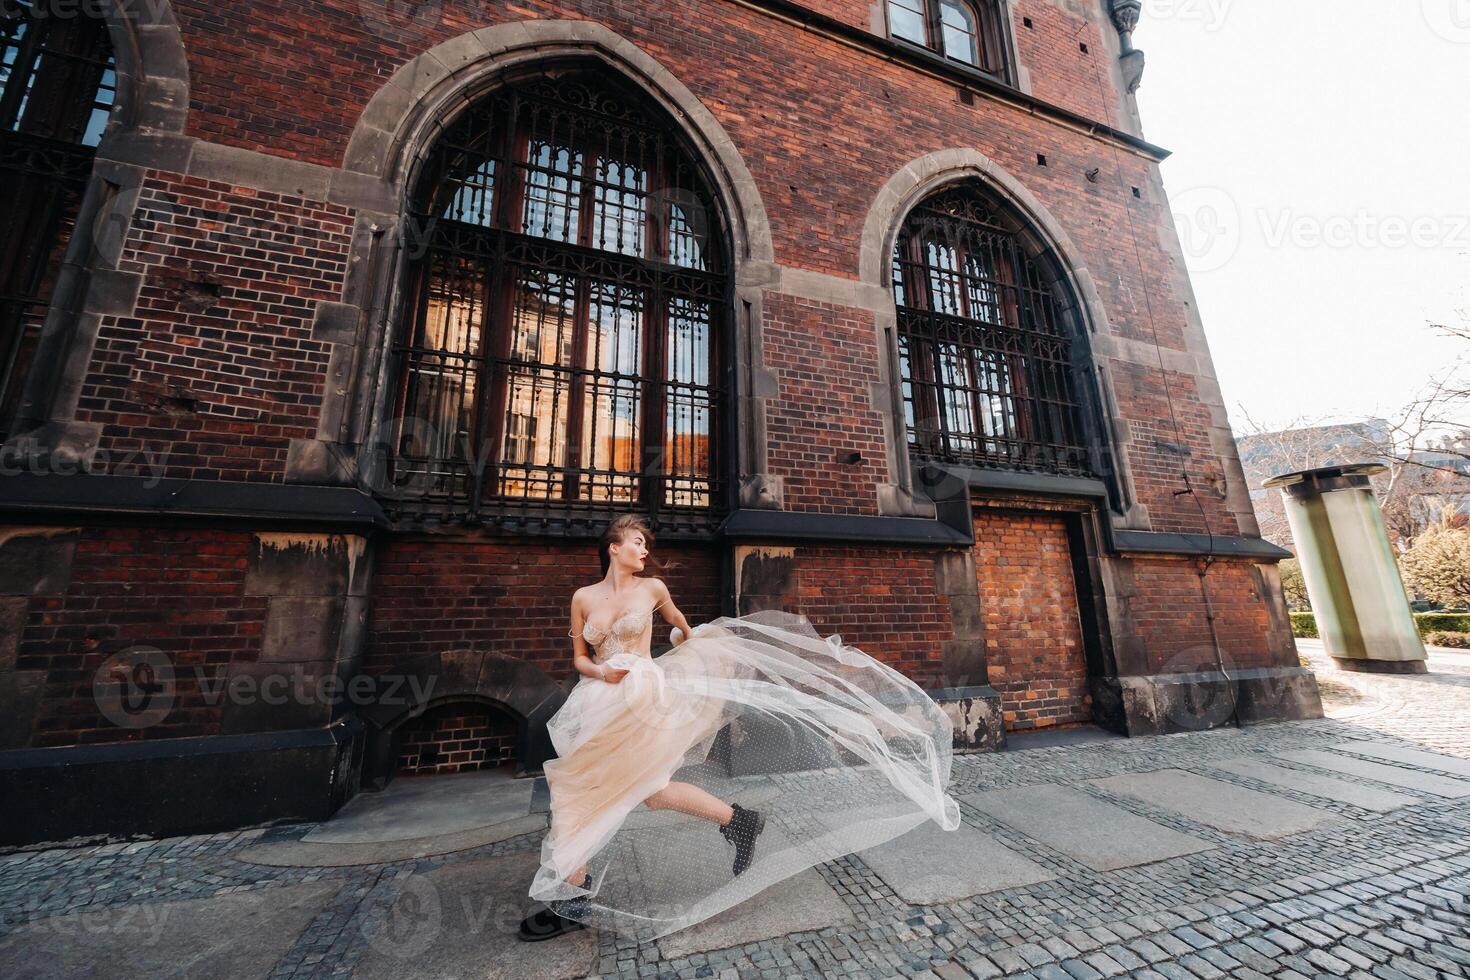 A bride in a wedding dress with long hair in the old town of Wroclaw. Wedding photo shoot in the center of an ancient city in Poland.Wroclaw, Poland